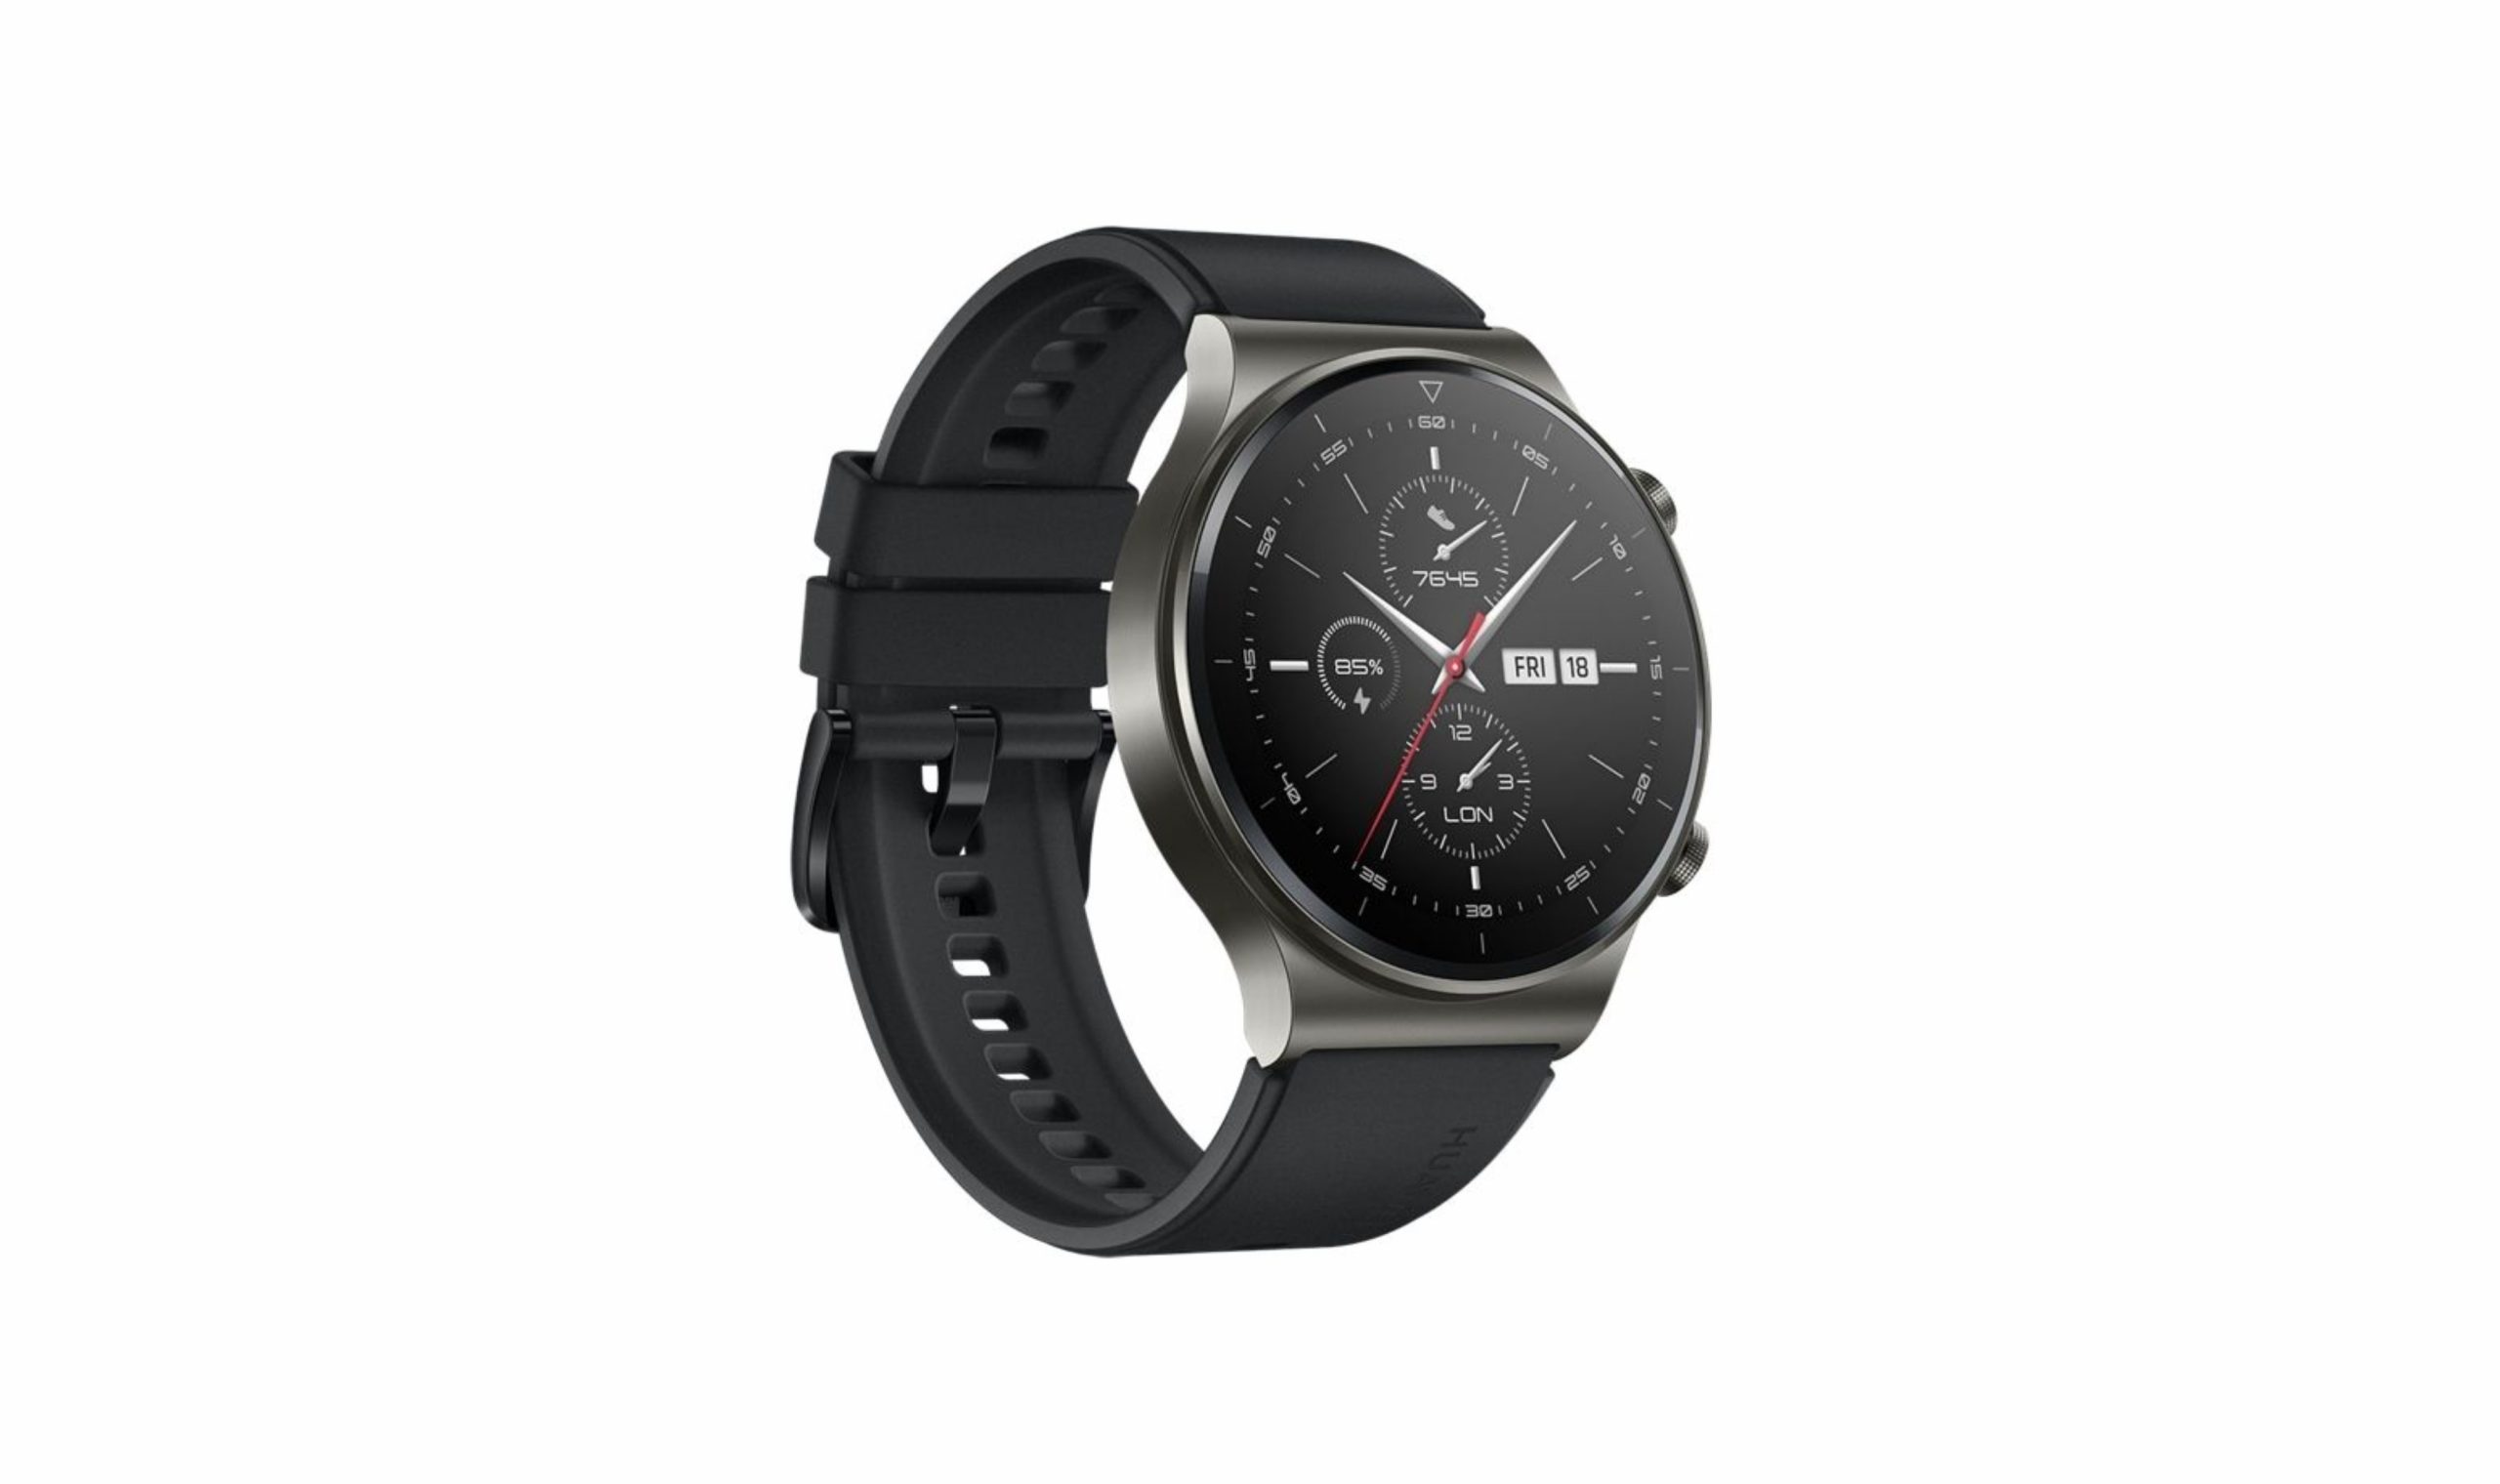 Huawei Watch GT 2 Pro launched along with special online deals till October 10